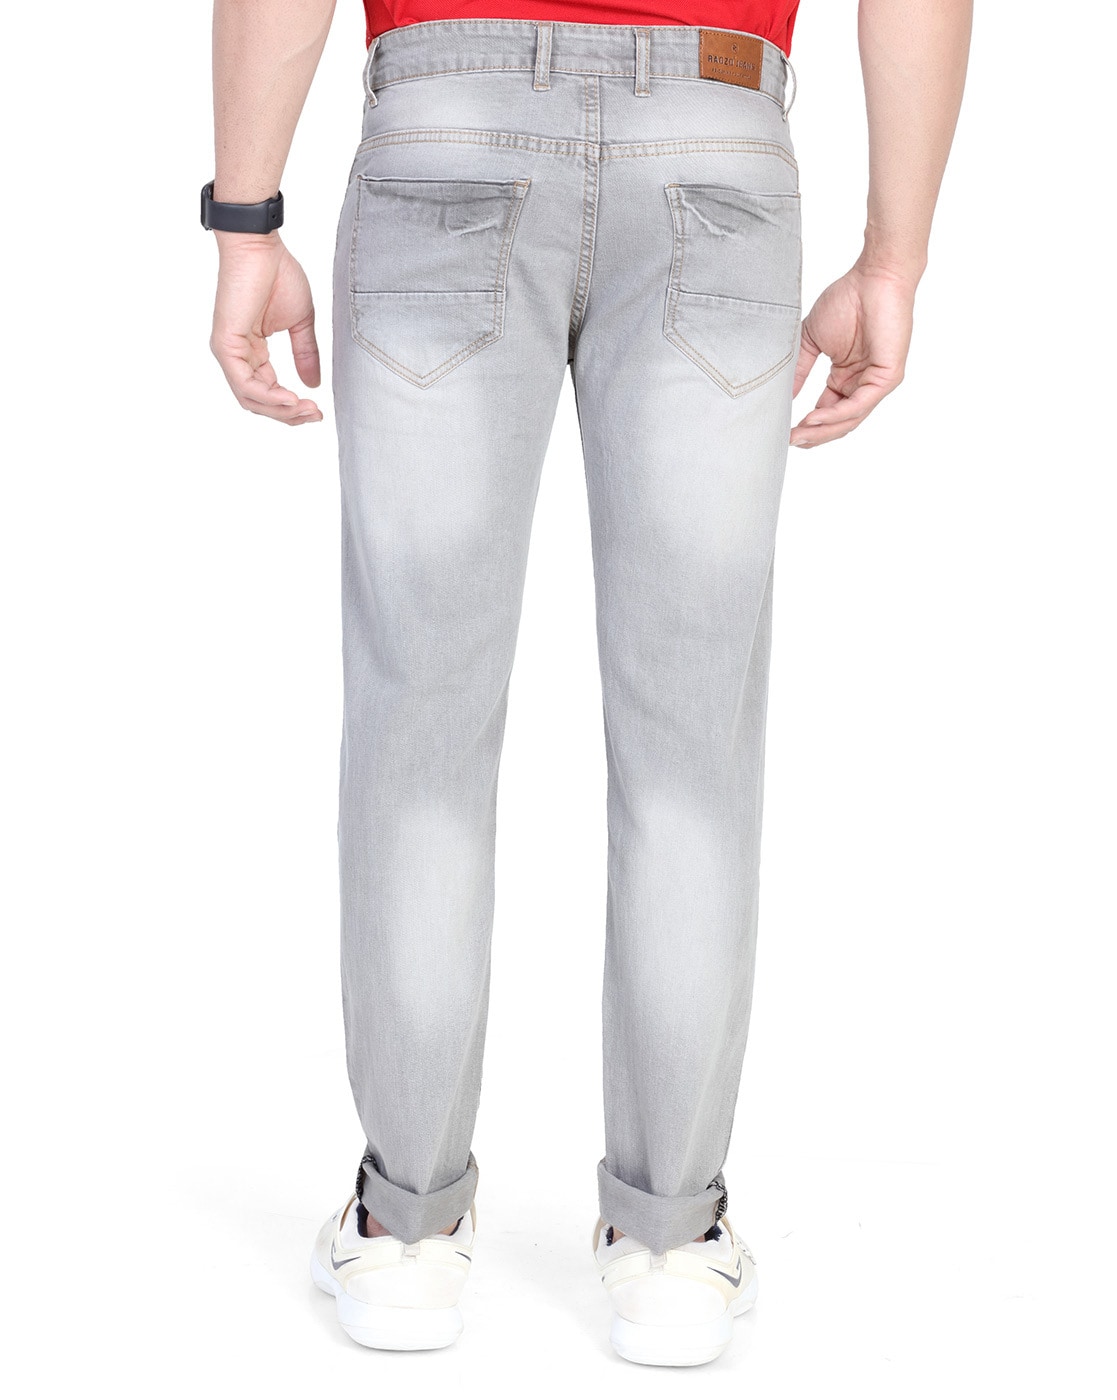 Buy Blue Jeans for Men by RAGZO Online